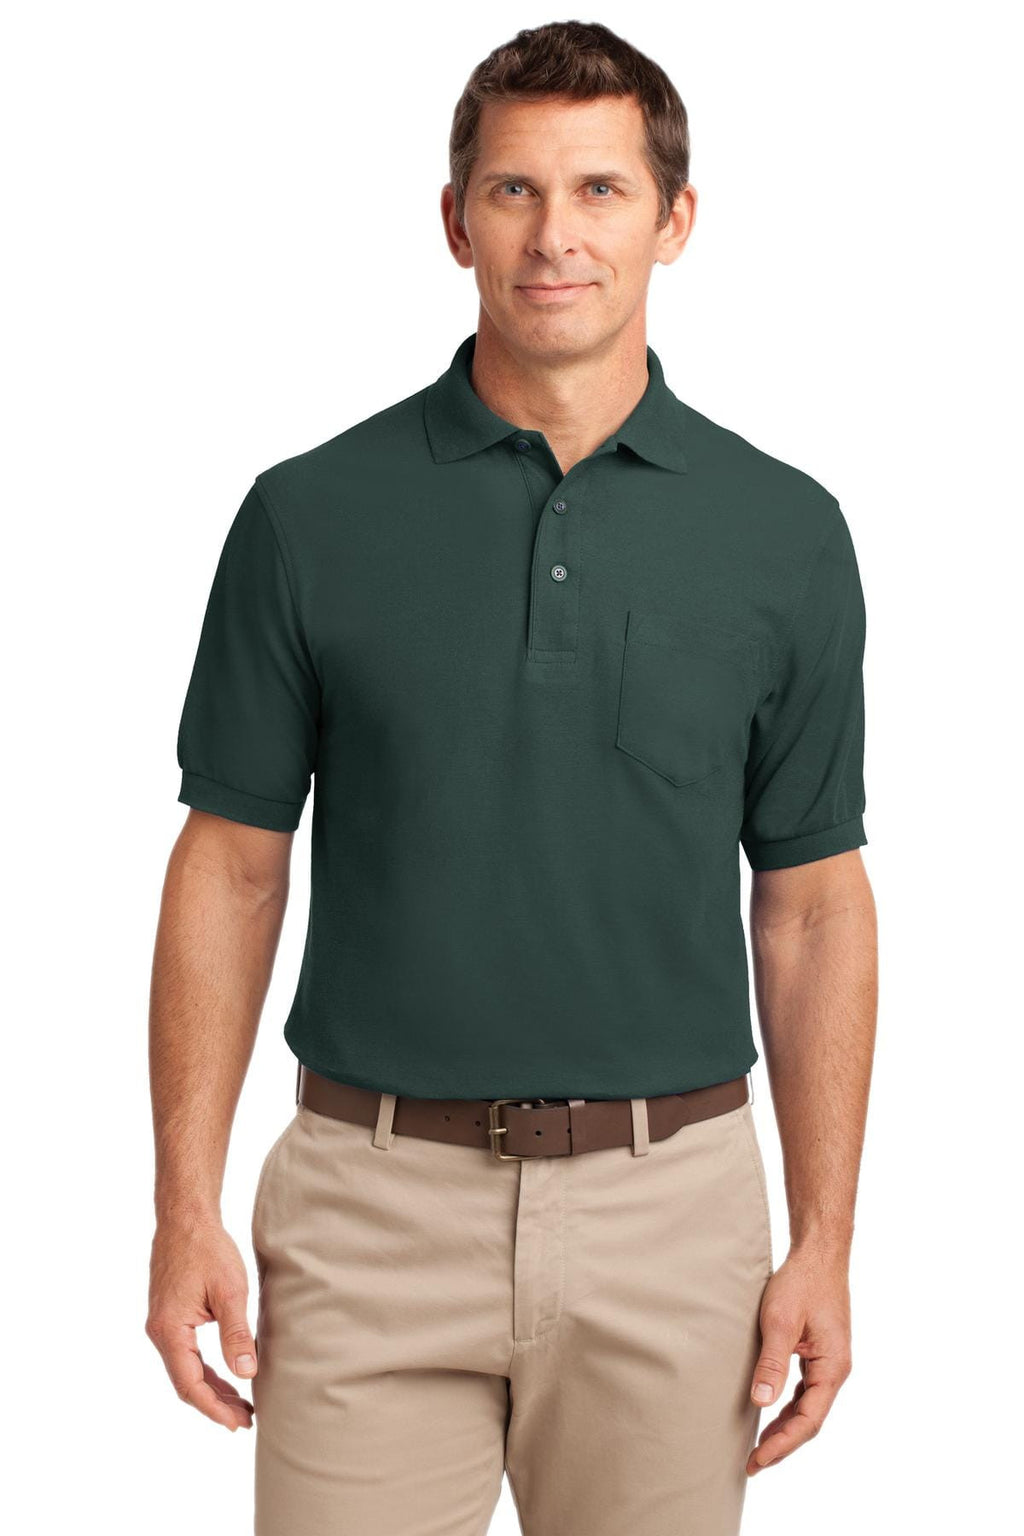 Port Authority Men's Silk Touch Polo Shirt With Pocket-6